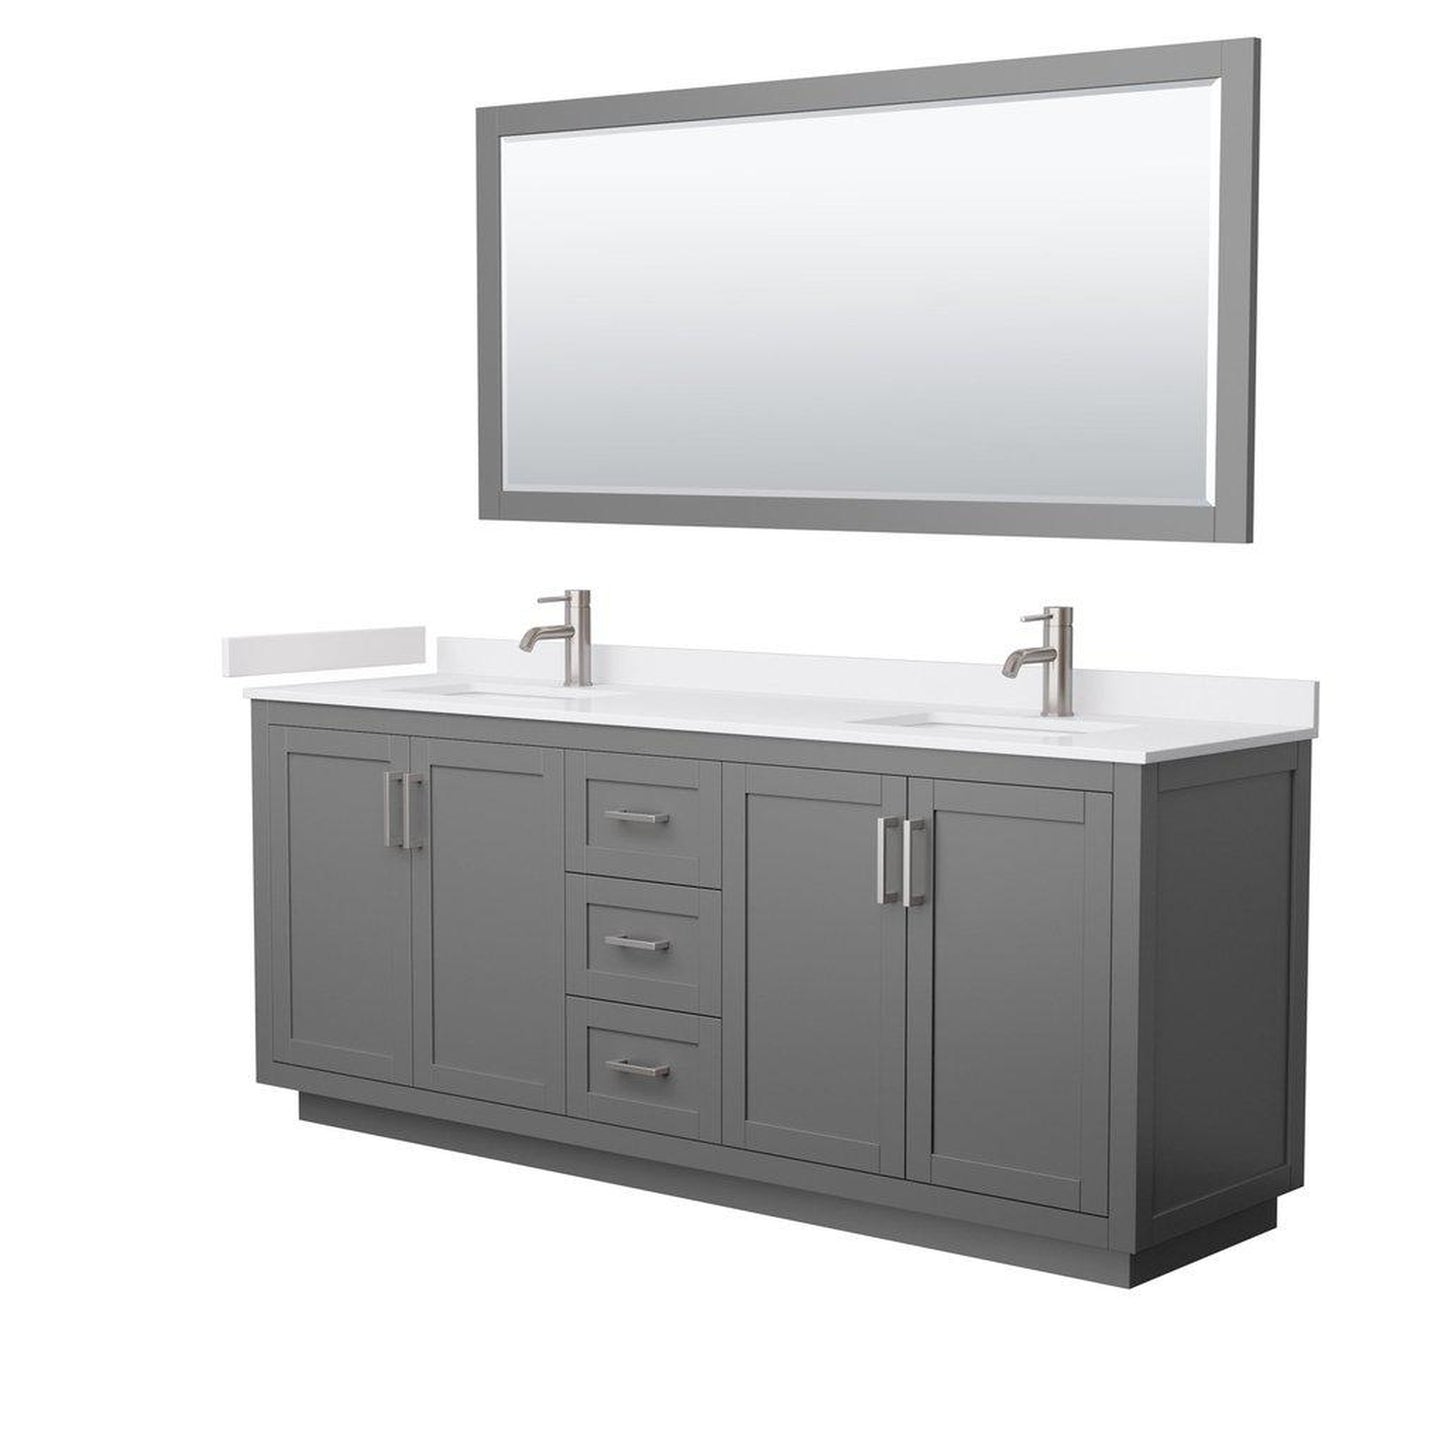 Wyndham Collection Miranda 80" Double Bathroom Dark Gray Vanity Set With White Cultured Marble Countertop, Undermount Square Sink, 70" Mirror And Brushed Nickel Trim